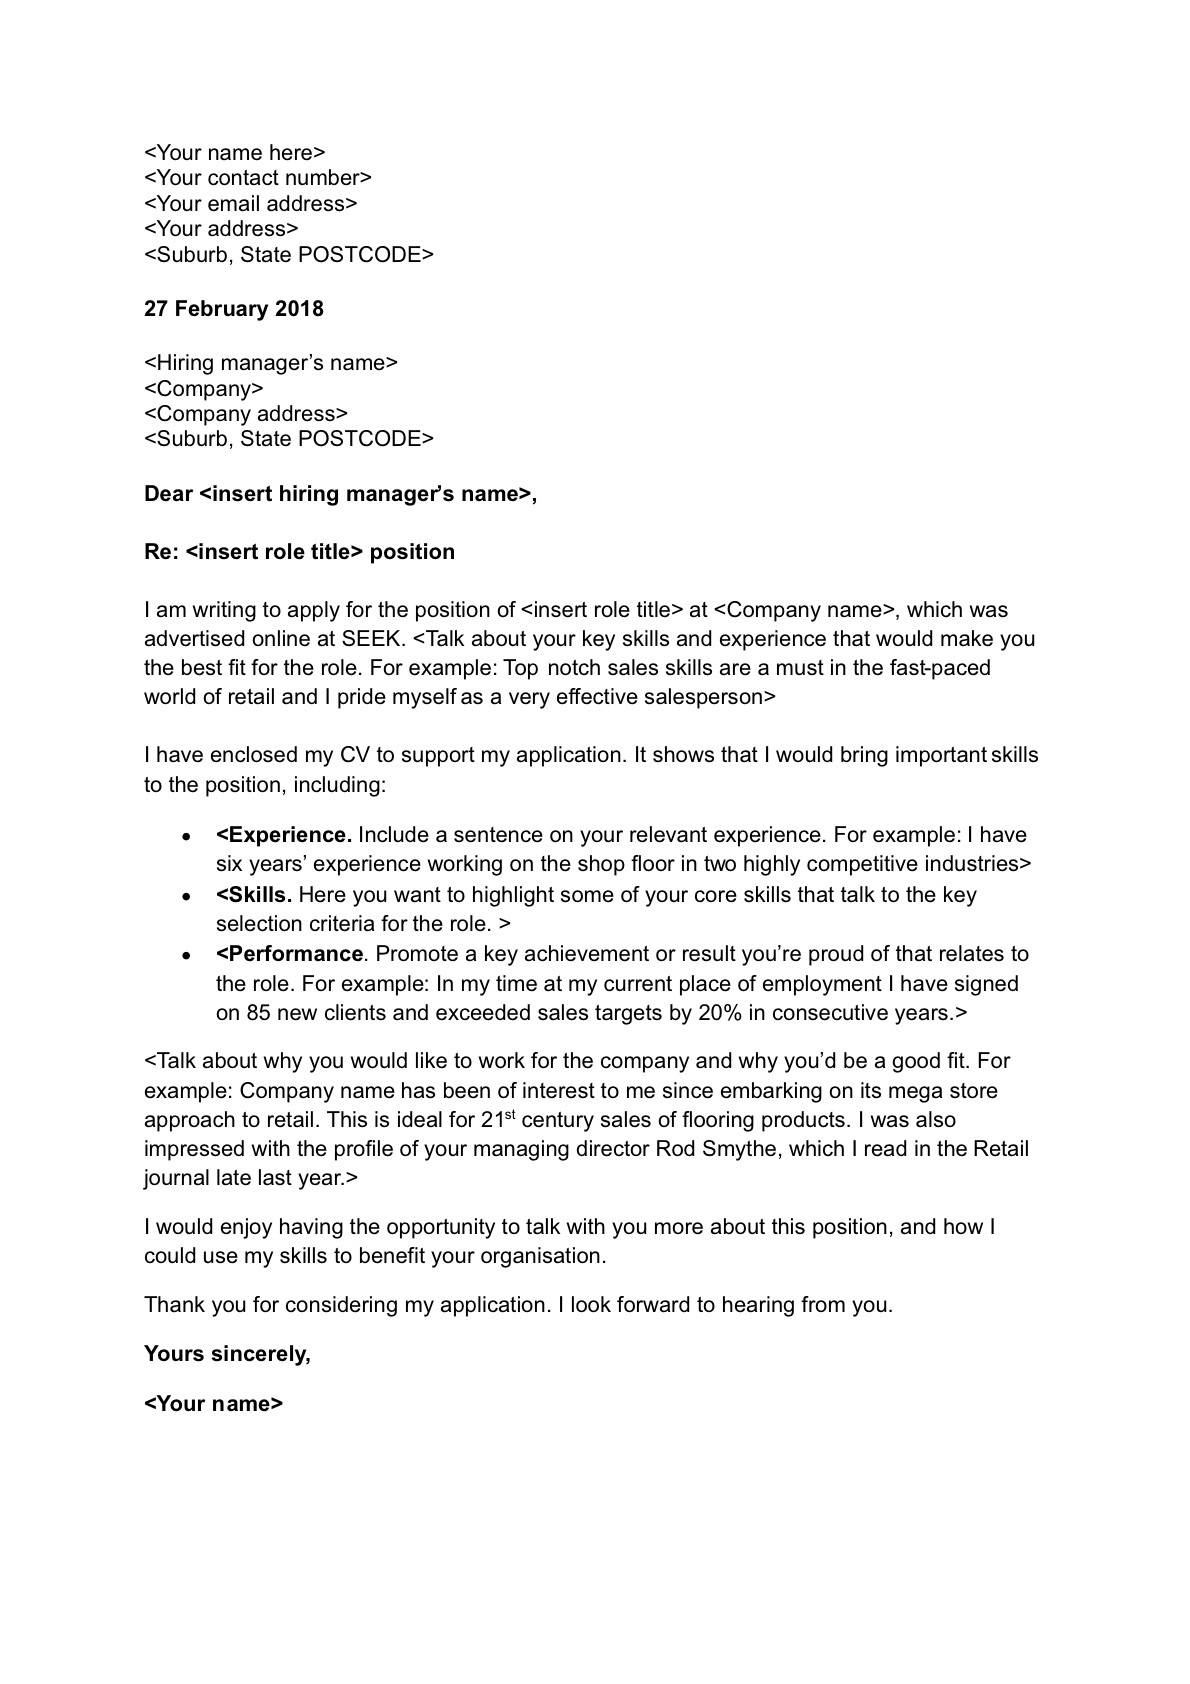 Generic Cover Letter Examples from seekconz.corewebdna.net.au